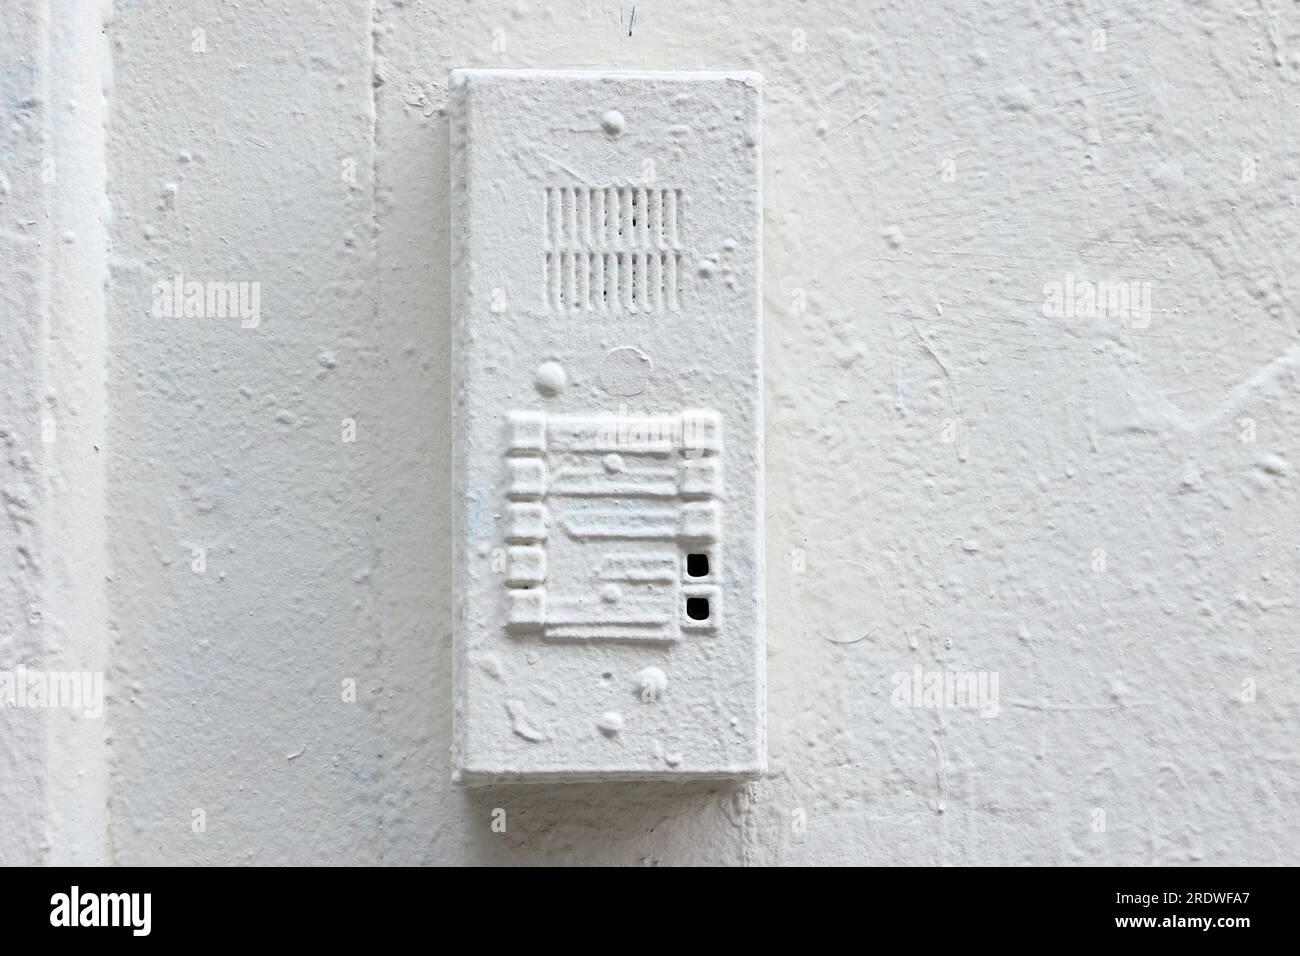 A Landlord Special. An intercom system painted over with multiple layers of cheap white paint. Stock Photo